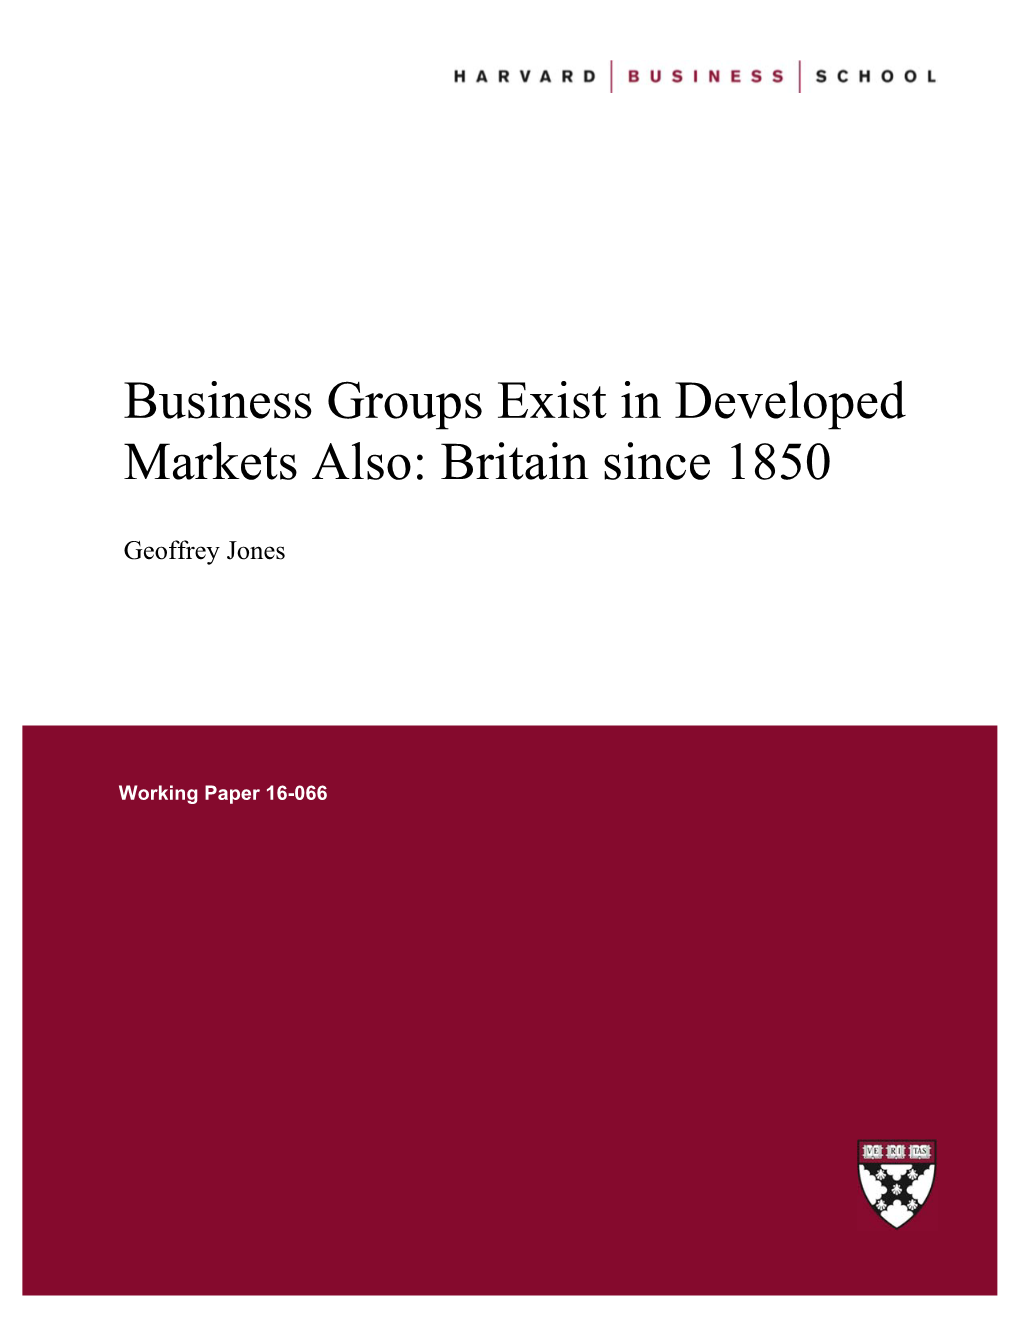 Business Groups Exist in Developed Markets Also: Britain Since 1850